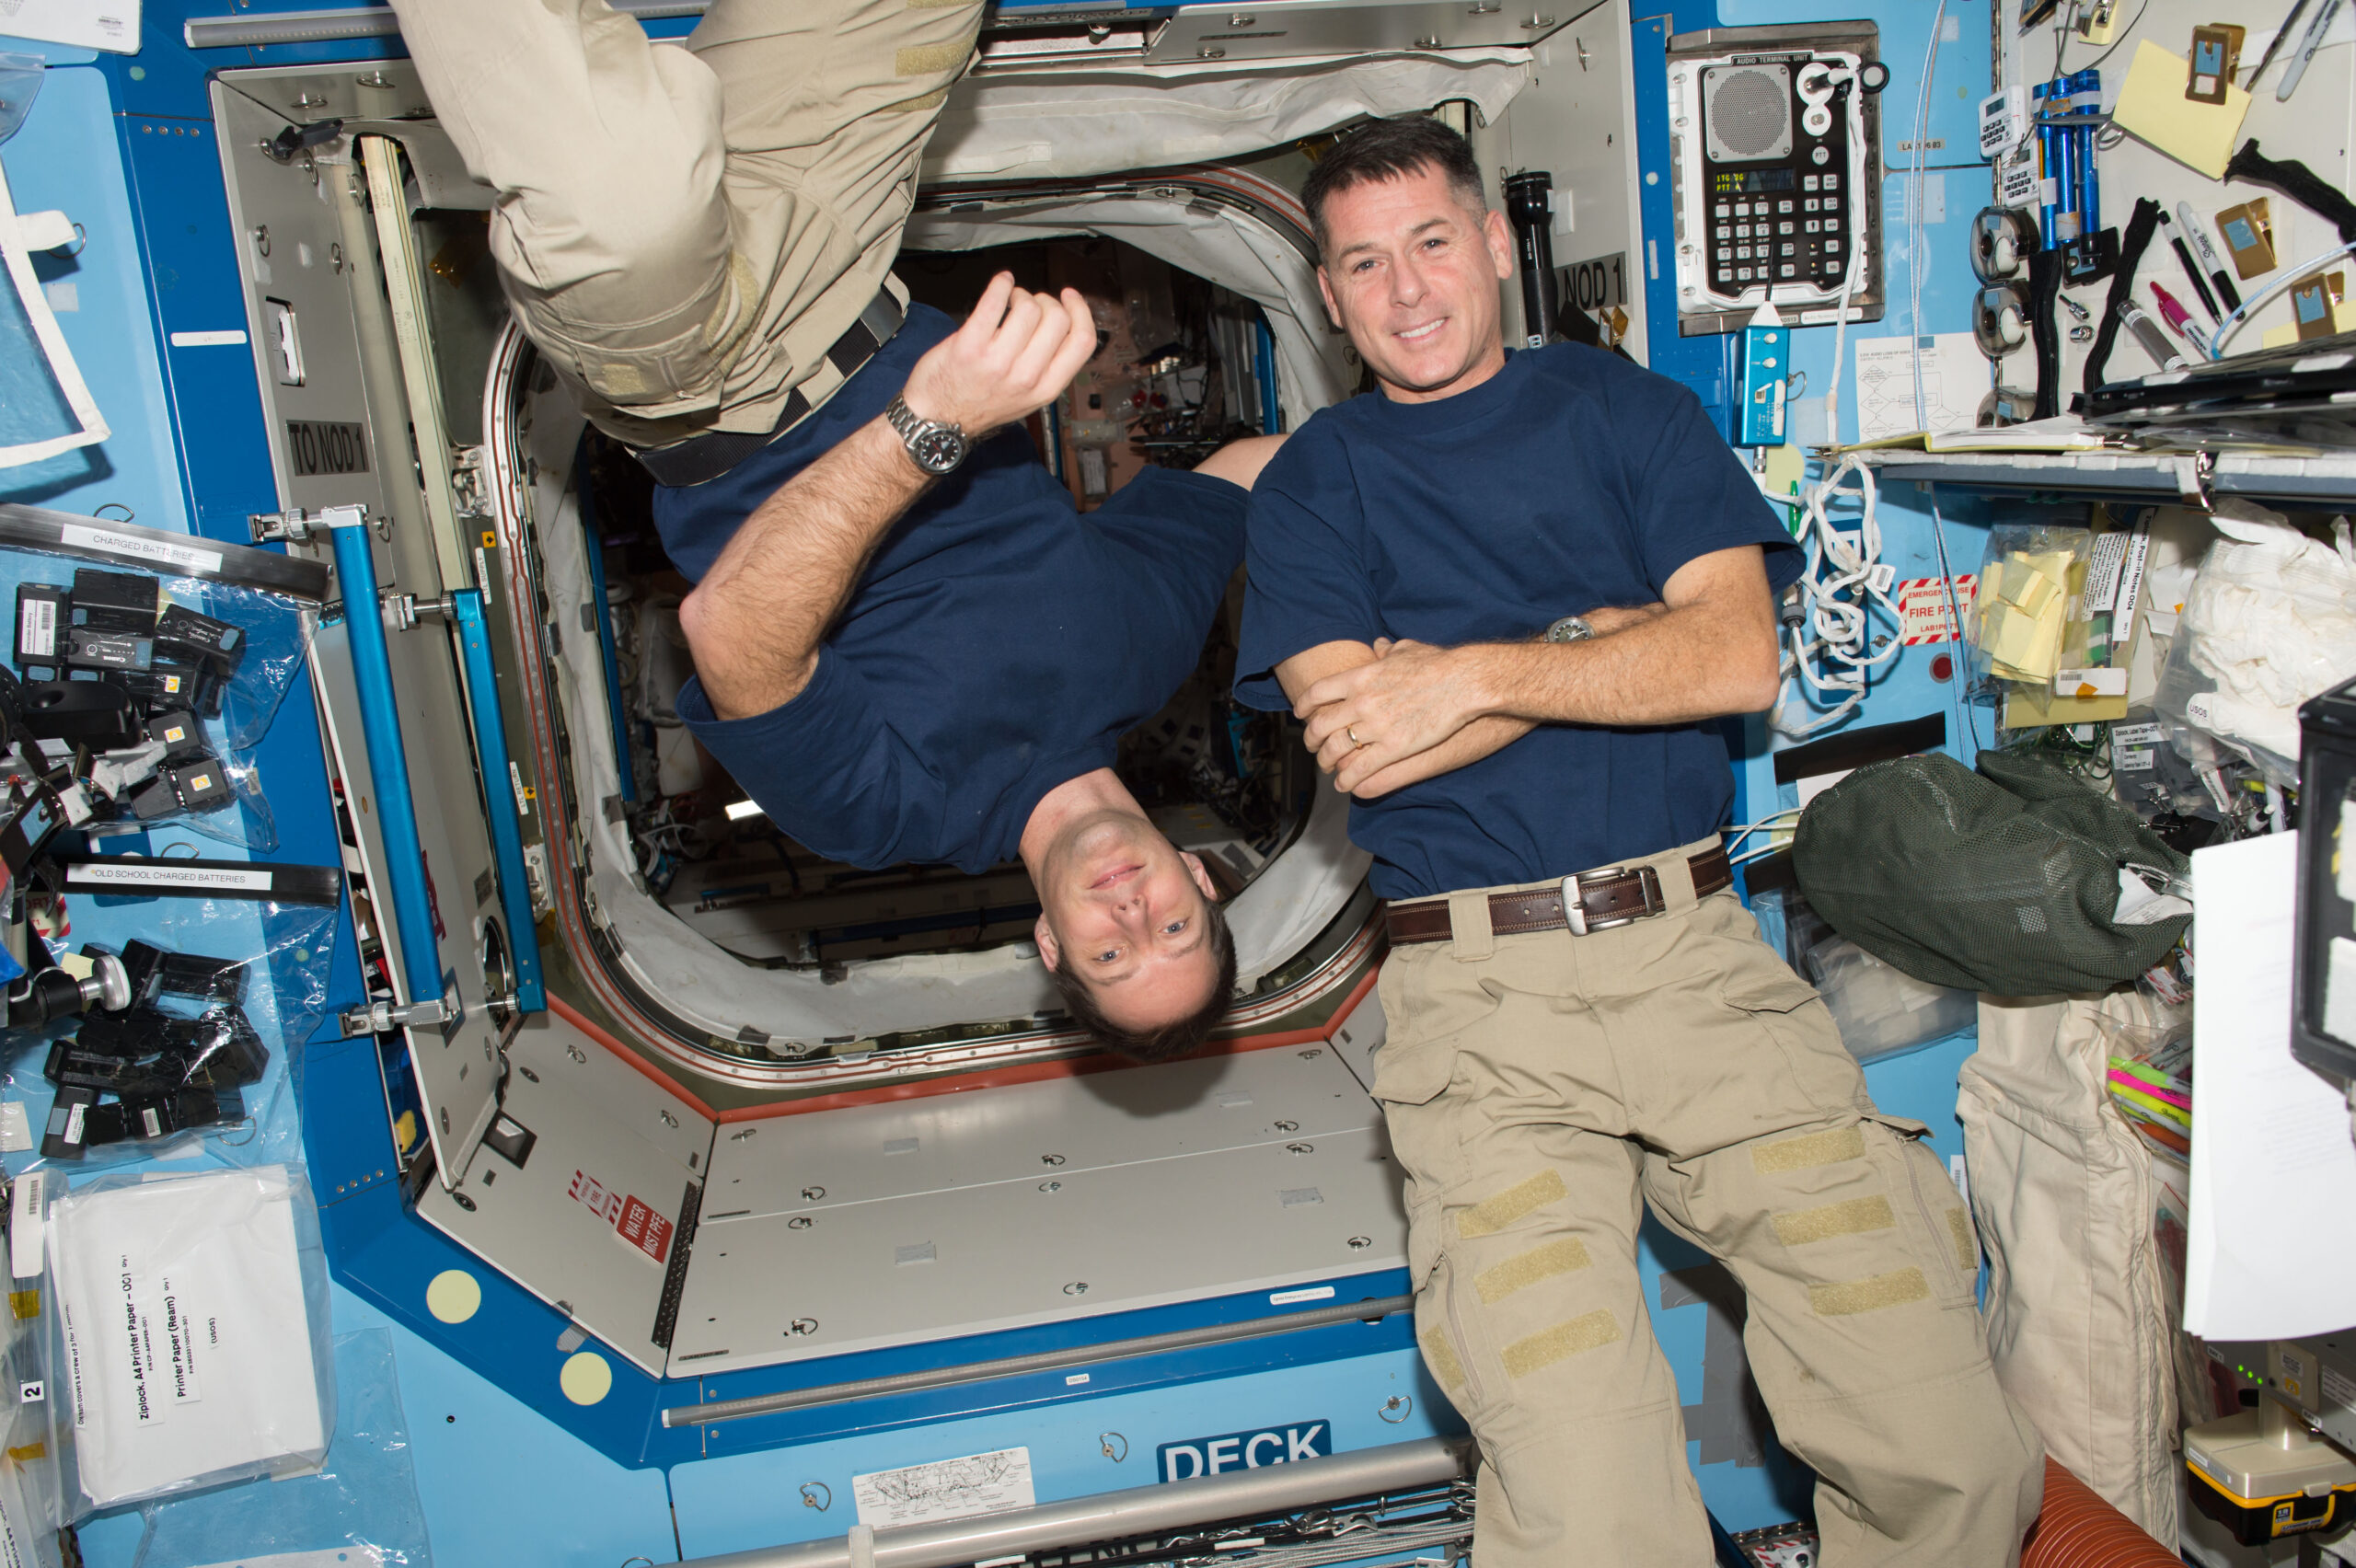 Texas Students to Hear from Astronauts on International Space Station